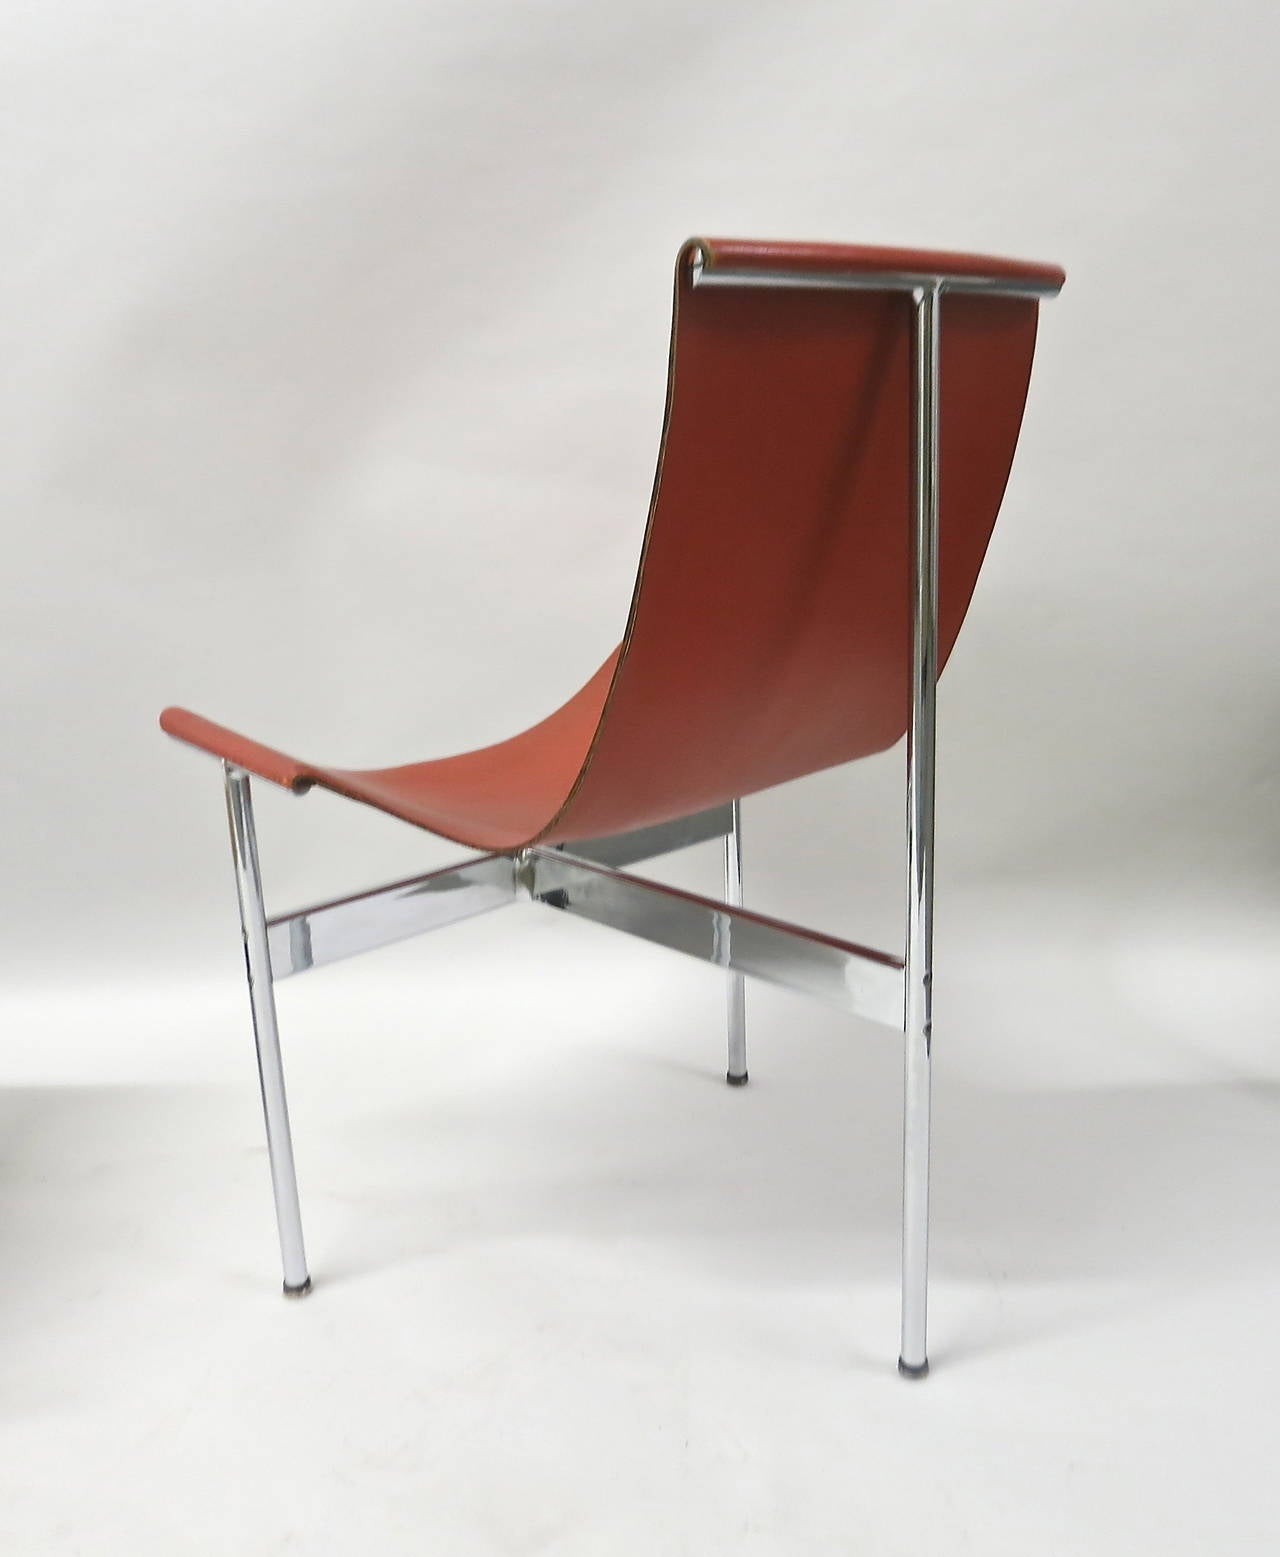 Mid-20th Century Ten T-Chairs in Original Condition by Katavolos, Kelly, Littell for Laverne 1967